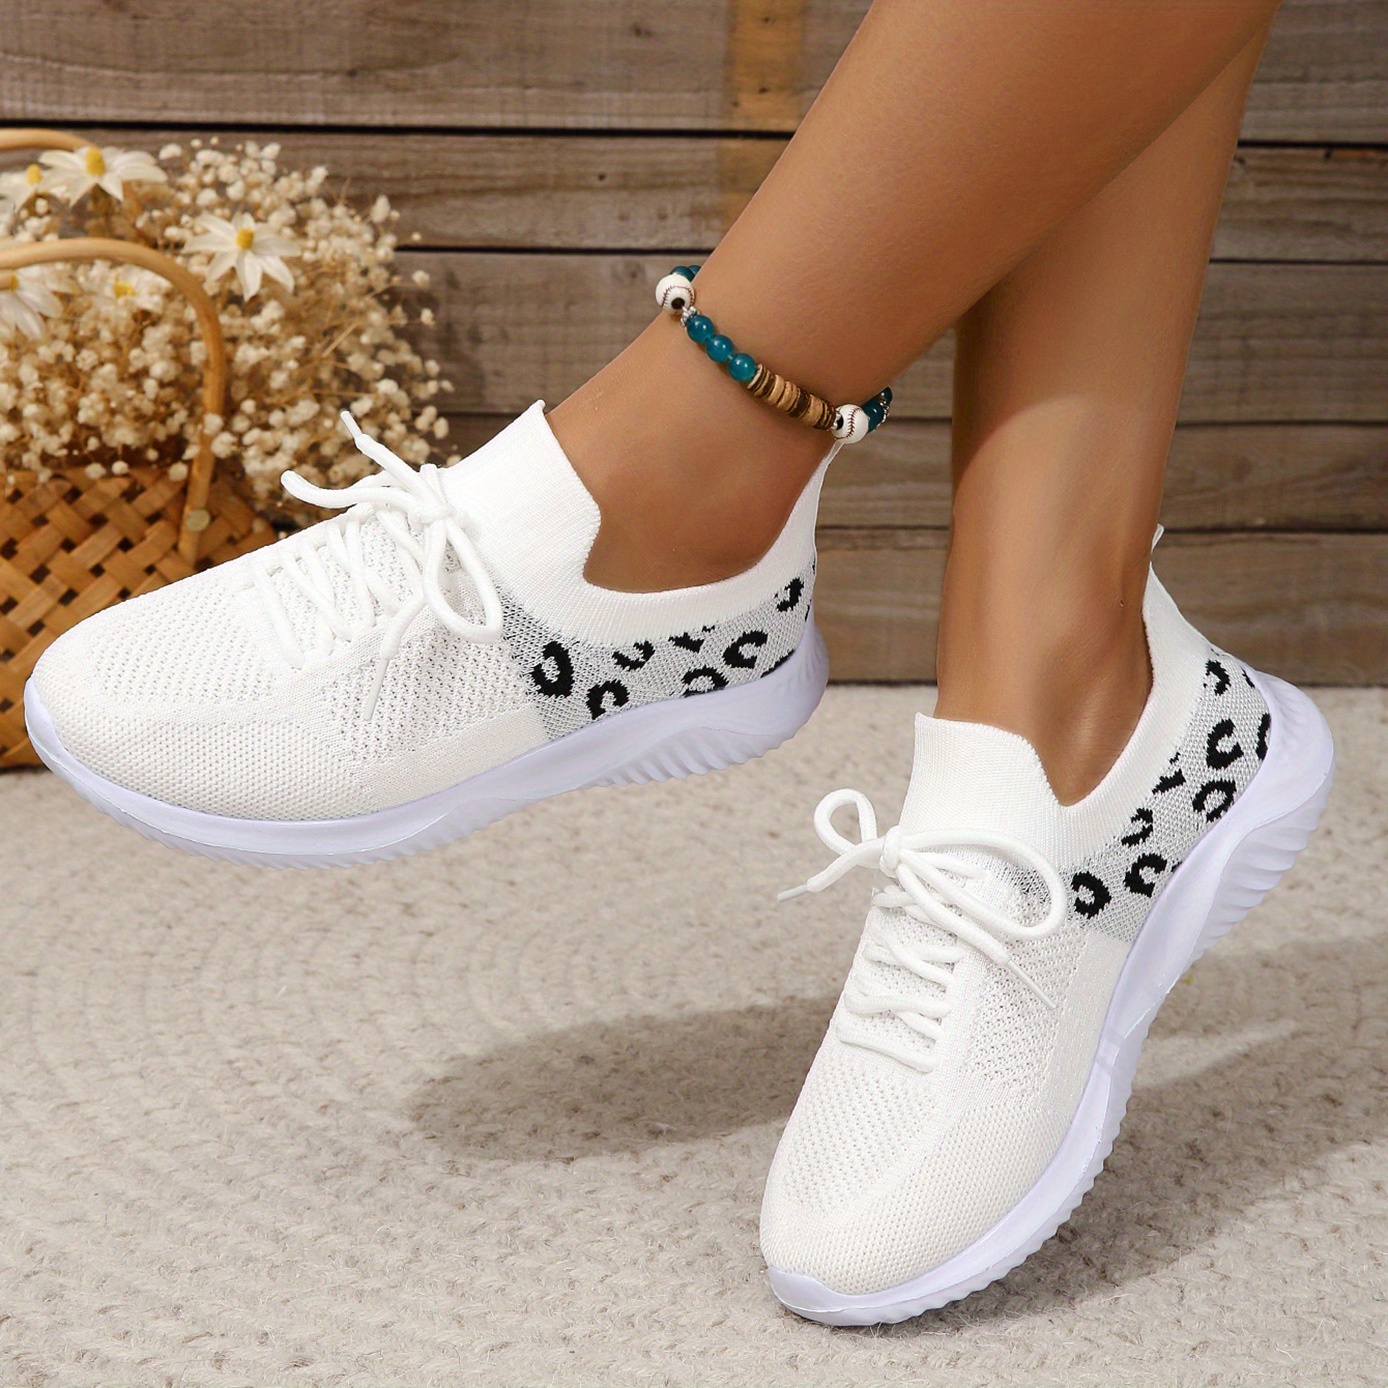 Autumn/winter Knitted Lace-up Casual Sports Shoes For Women